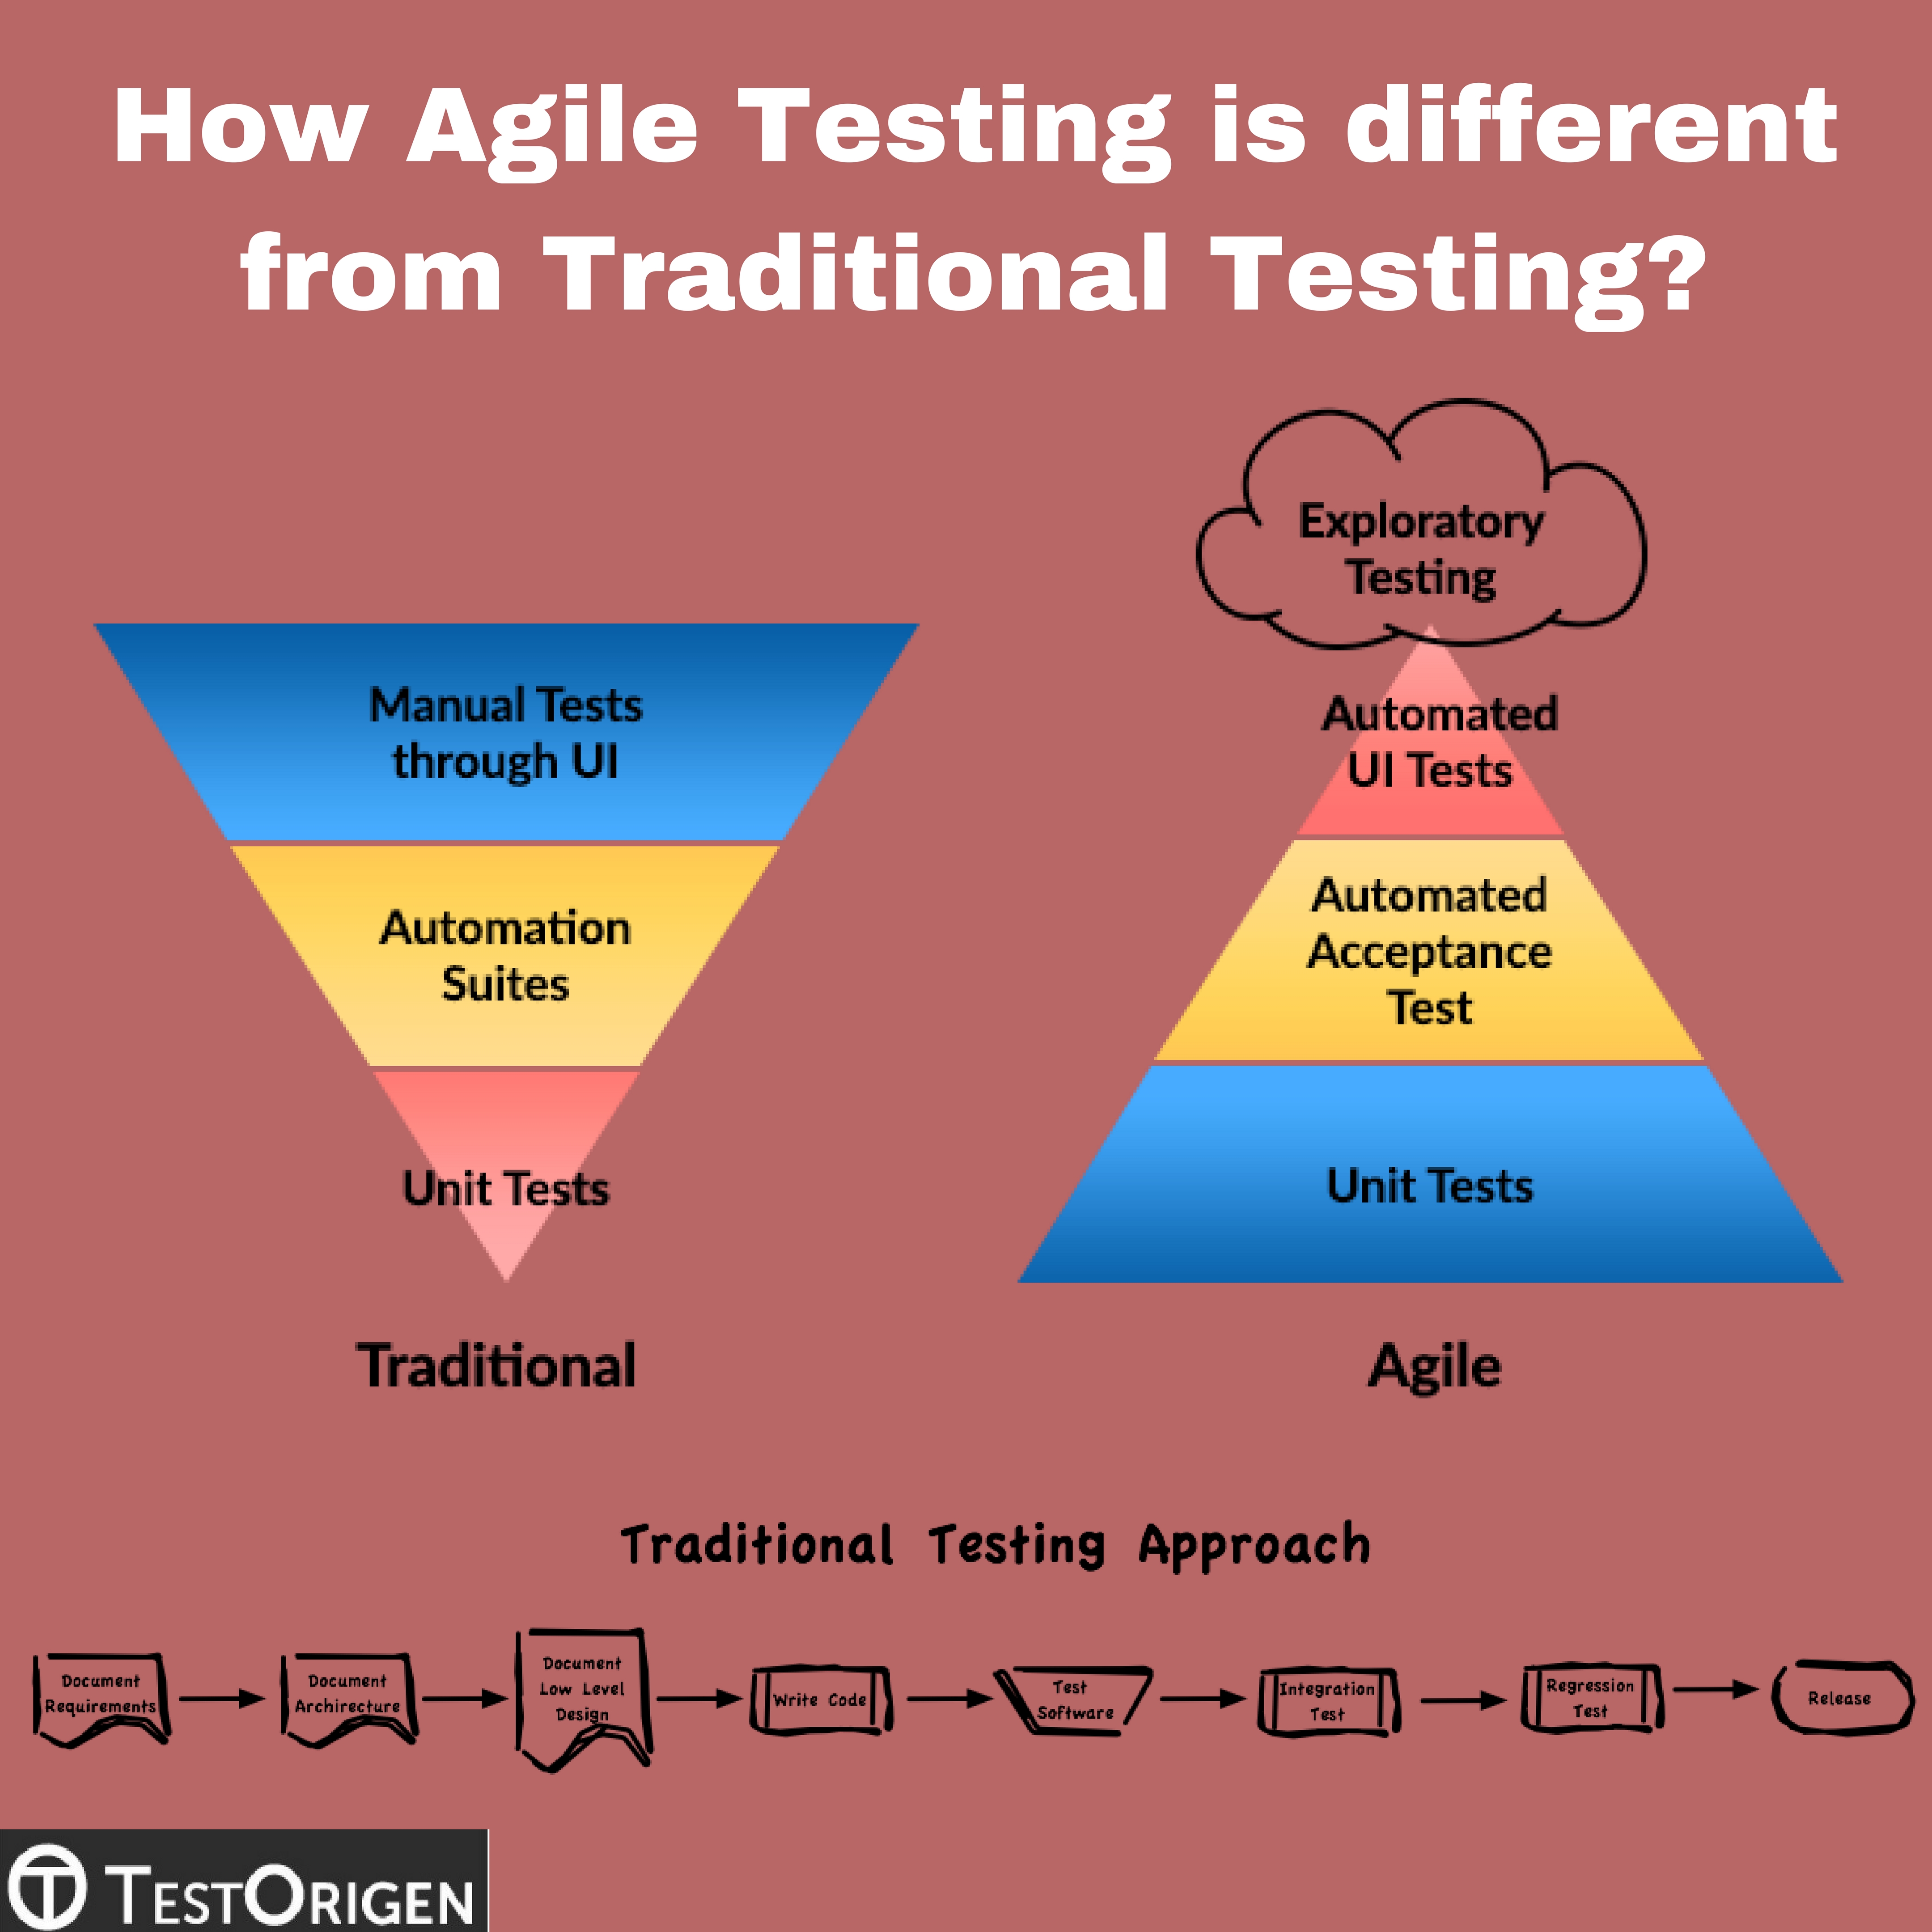 How Agile Testing is different from Traditional Testing?